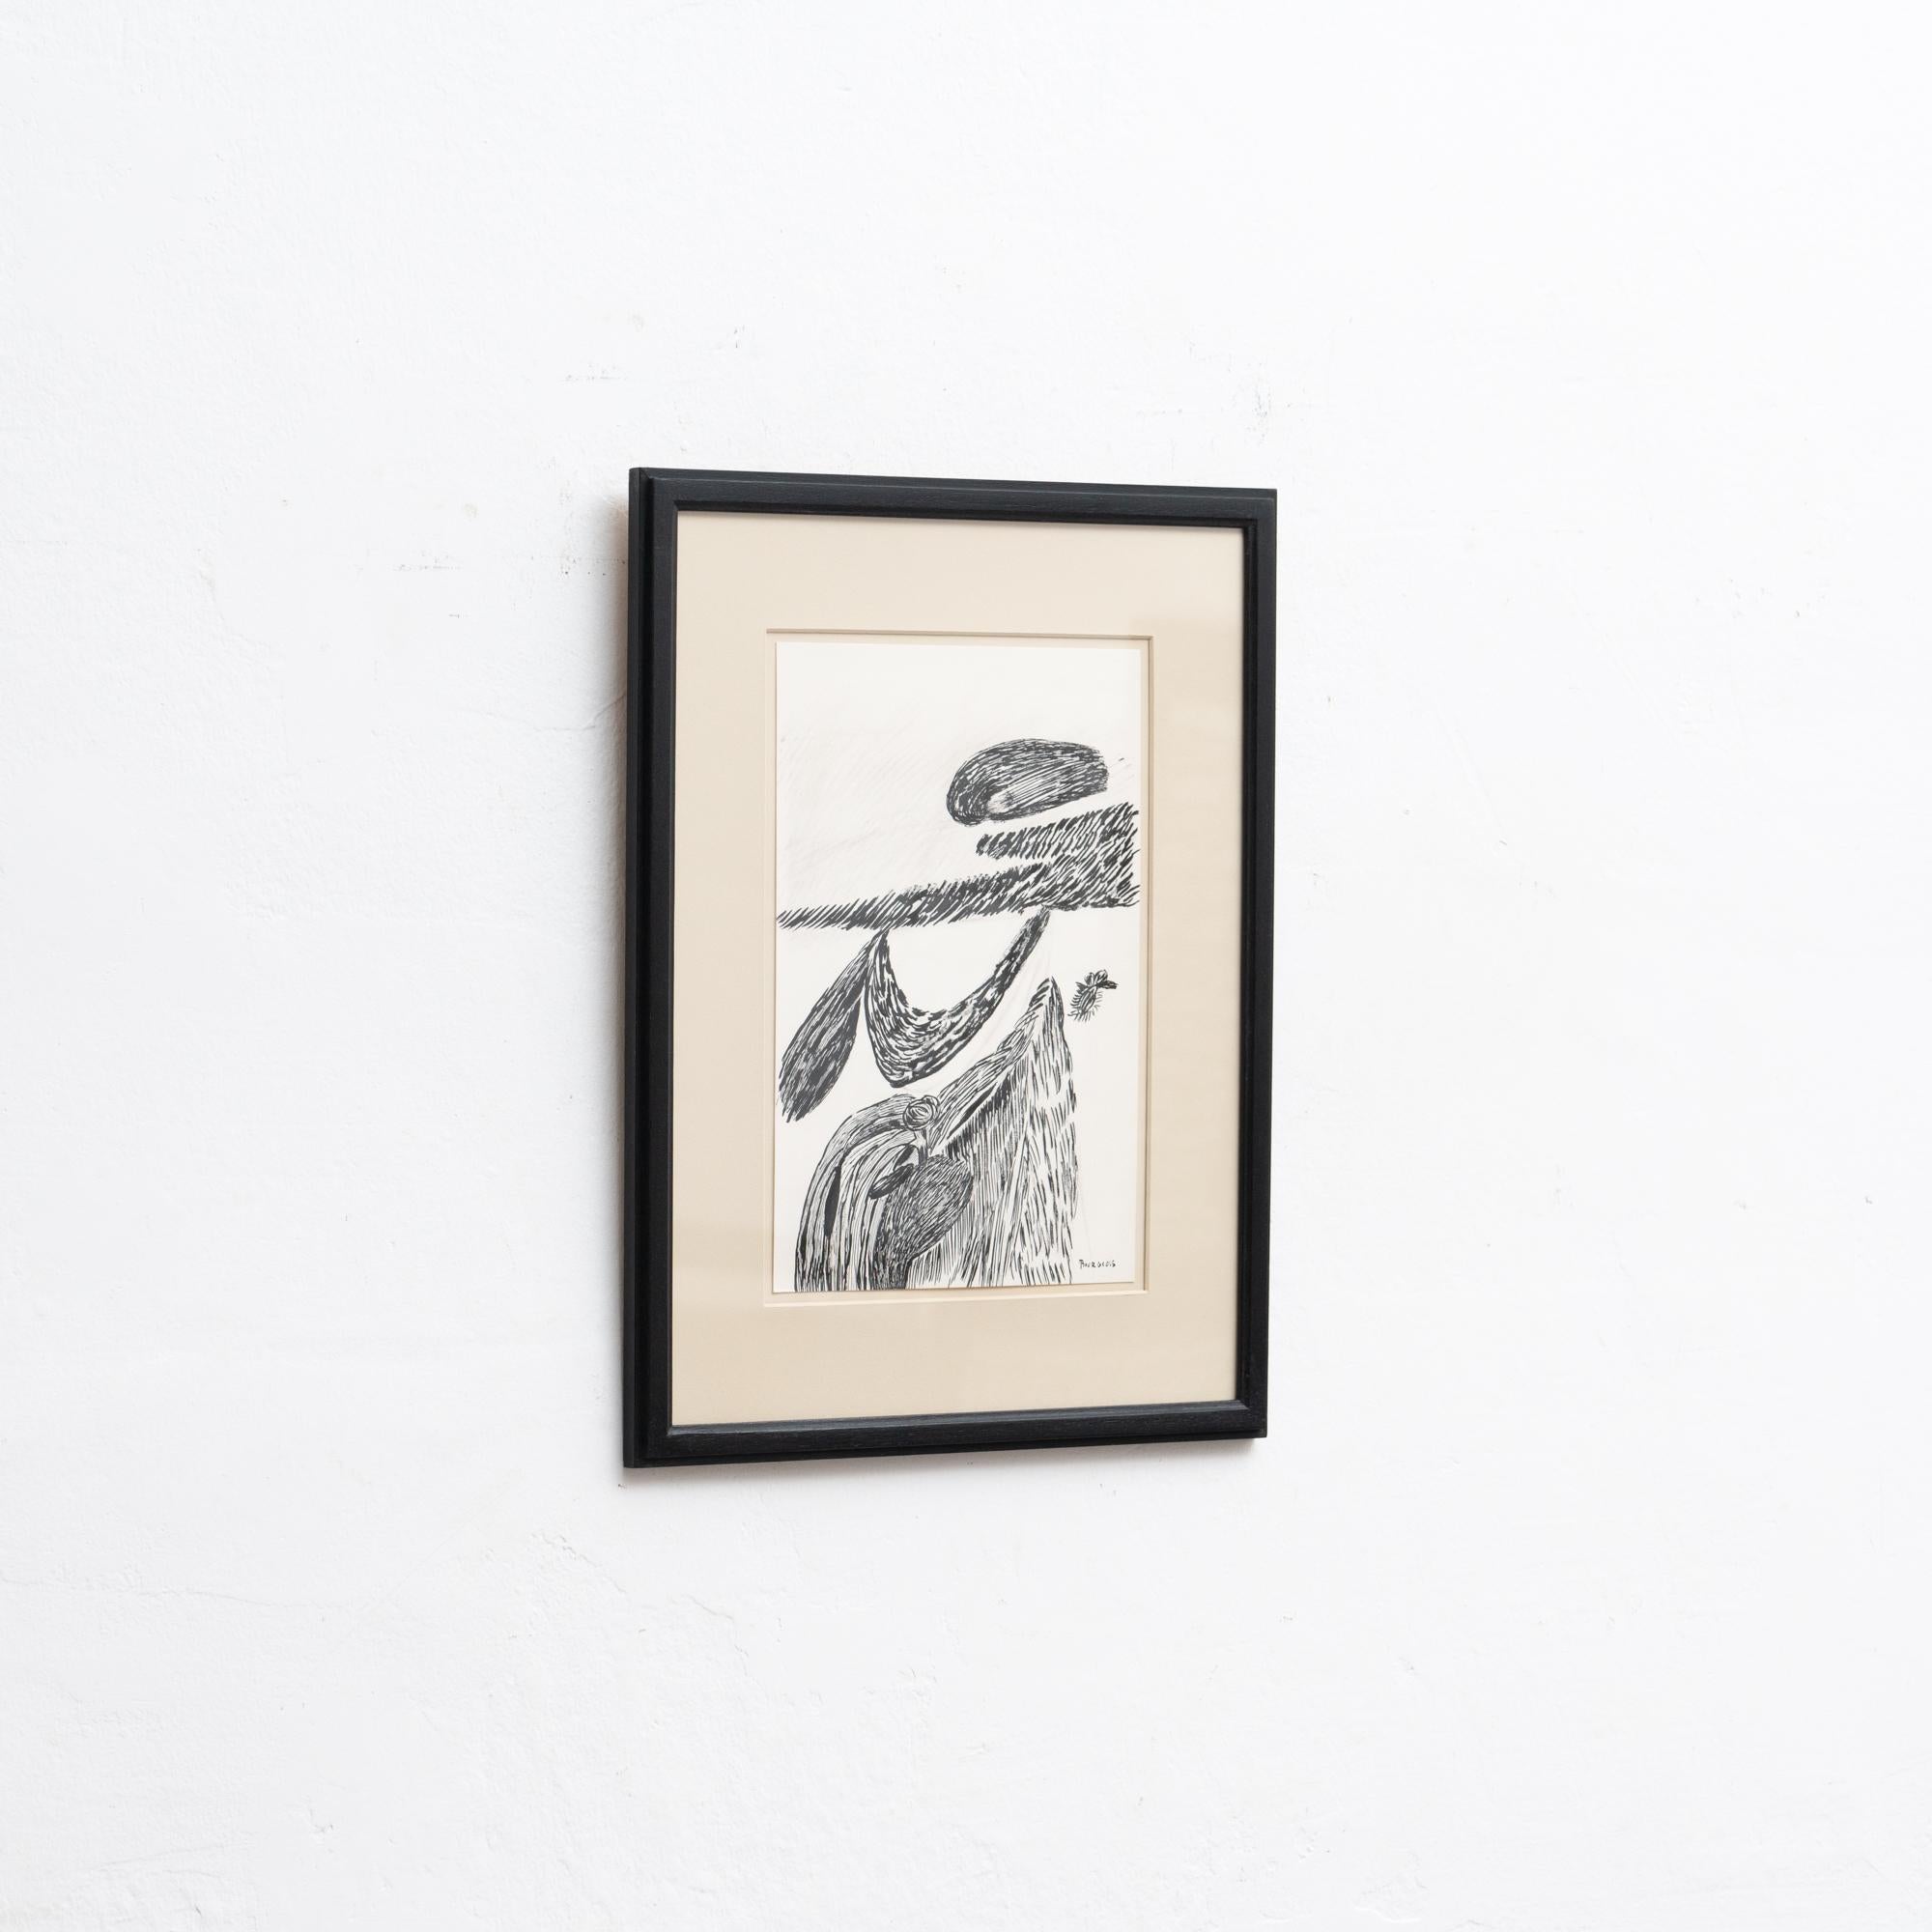 Mid-Century Modern Louise Bourgeois 'Inner Life' Lithography, 1985 For Sale